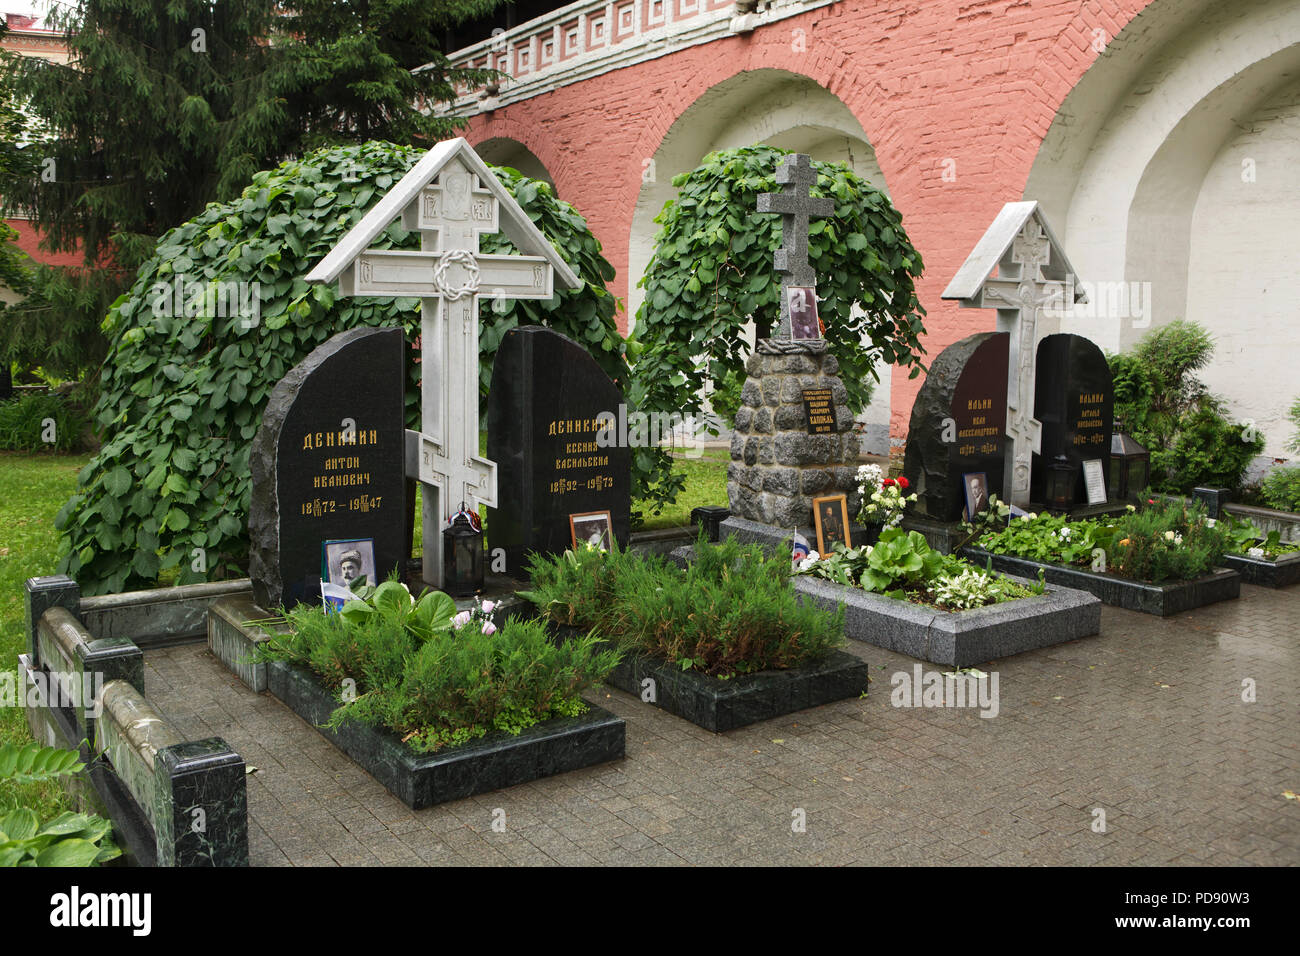 Graves of Russian military leader Anton Denikin and his wife Xenia Denikina, Russian military leader Vladimir Kappel and Russian philosopher Ivan Ilyin and his wife Natalia Ilyina (pictured from left to right) at the cemetery of the Donskoy Monastery in Moscow, Russia. The remains of the leading figures of the White movement during the Russian Civil War and of the Russian white émigré were transferred to Moscow from the United States, France, China and Switzerland in 2005 and 2006. Stock Photo